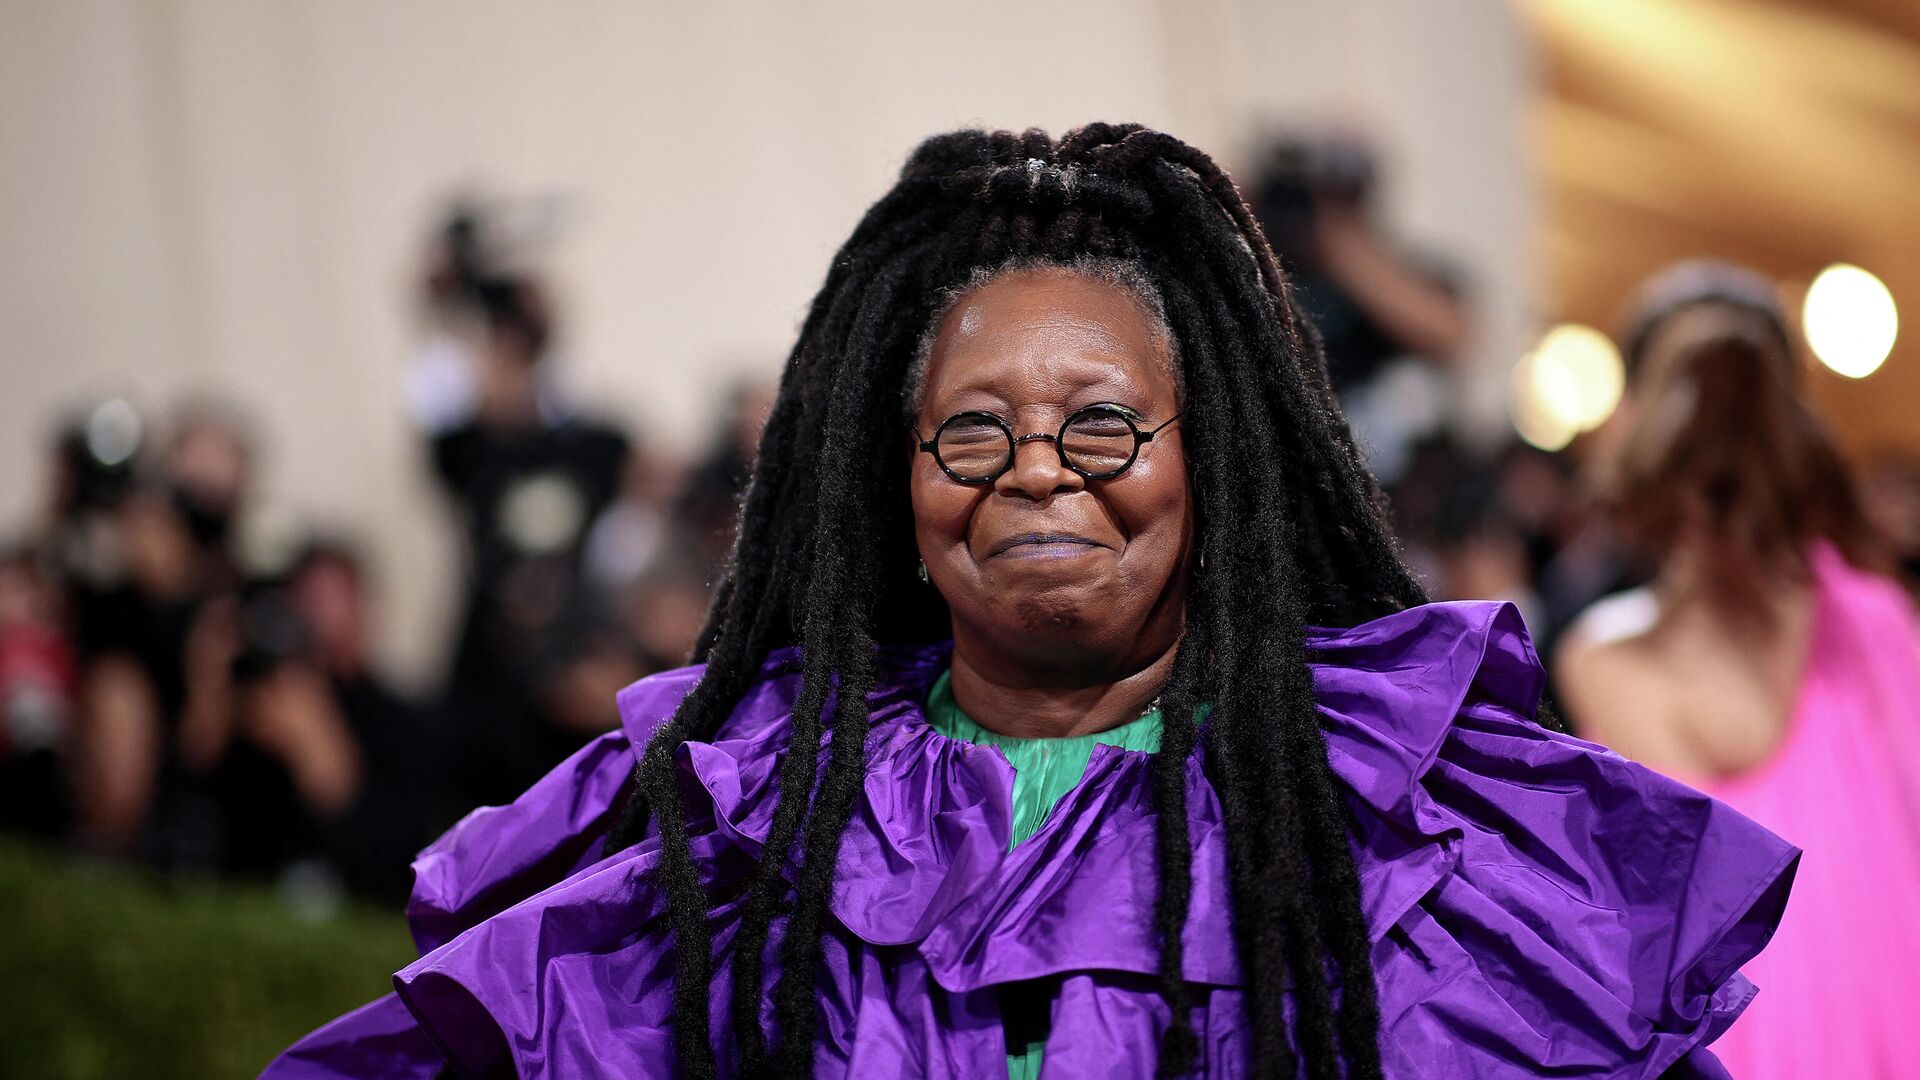 Whoopi Goldberg attends The 2021 Met Gala Celebrating In America: A Lexicon Of Fashion at Metropolitan Museum of Art on September 13, 2021 in New York City.  - Sputnik International, 1920, 02.02.2022